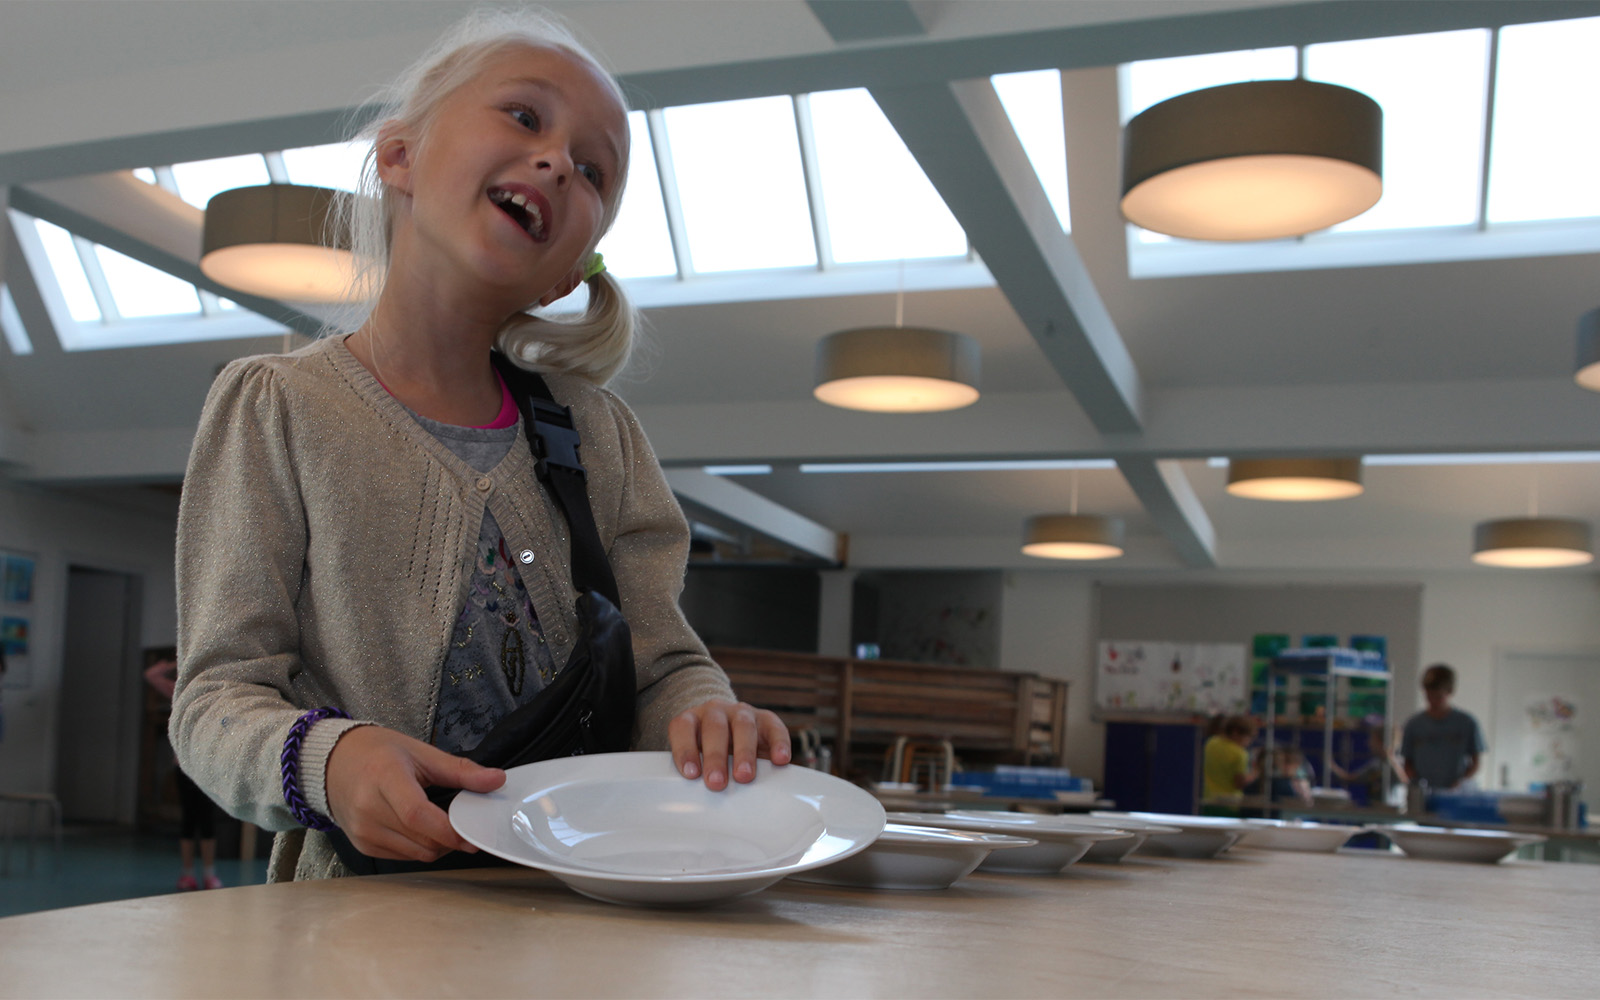 Young student in cafeteria illuminated with skylight and artificial lighting